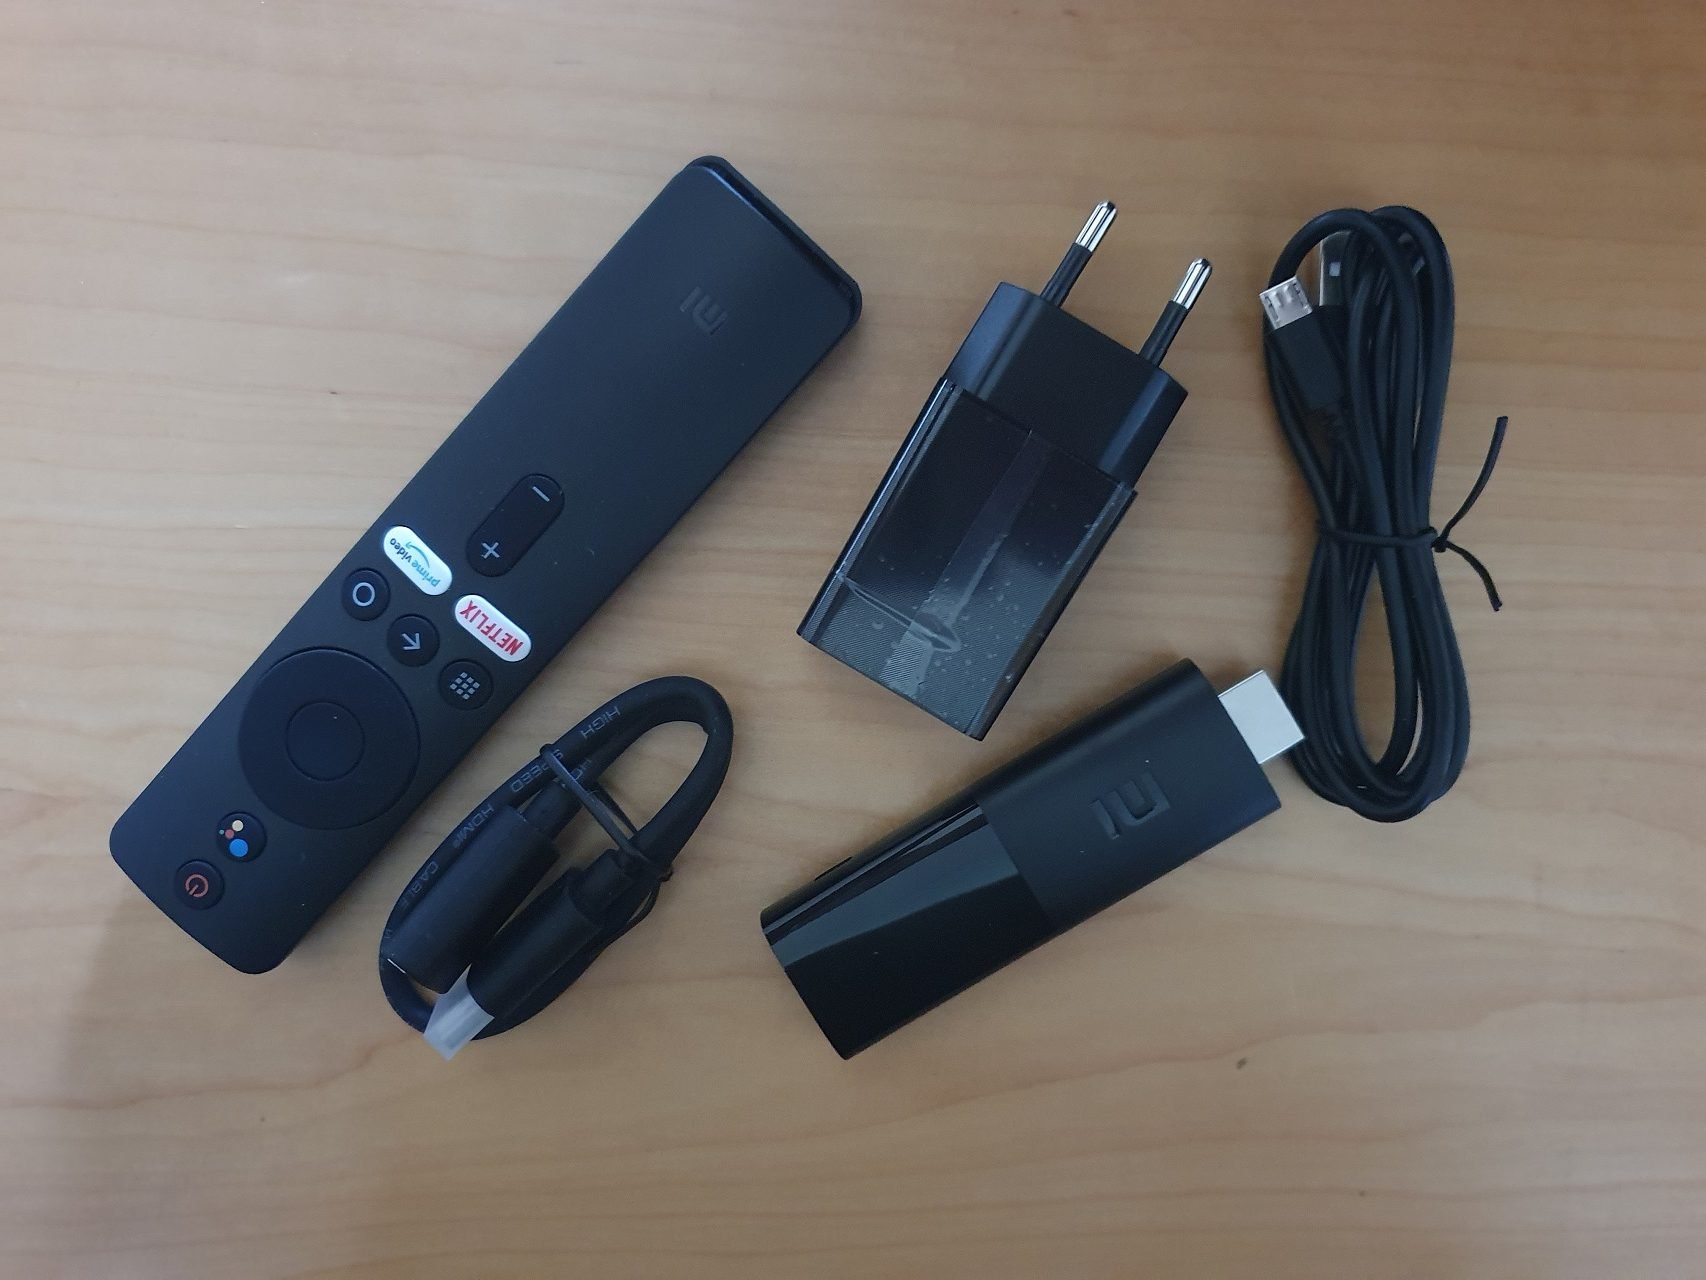 Content of a box of Mi TV Stick AndroidTV